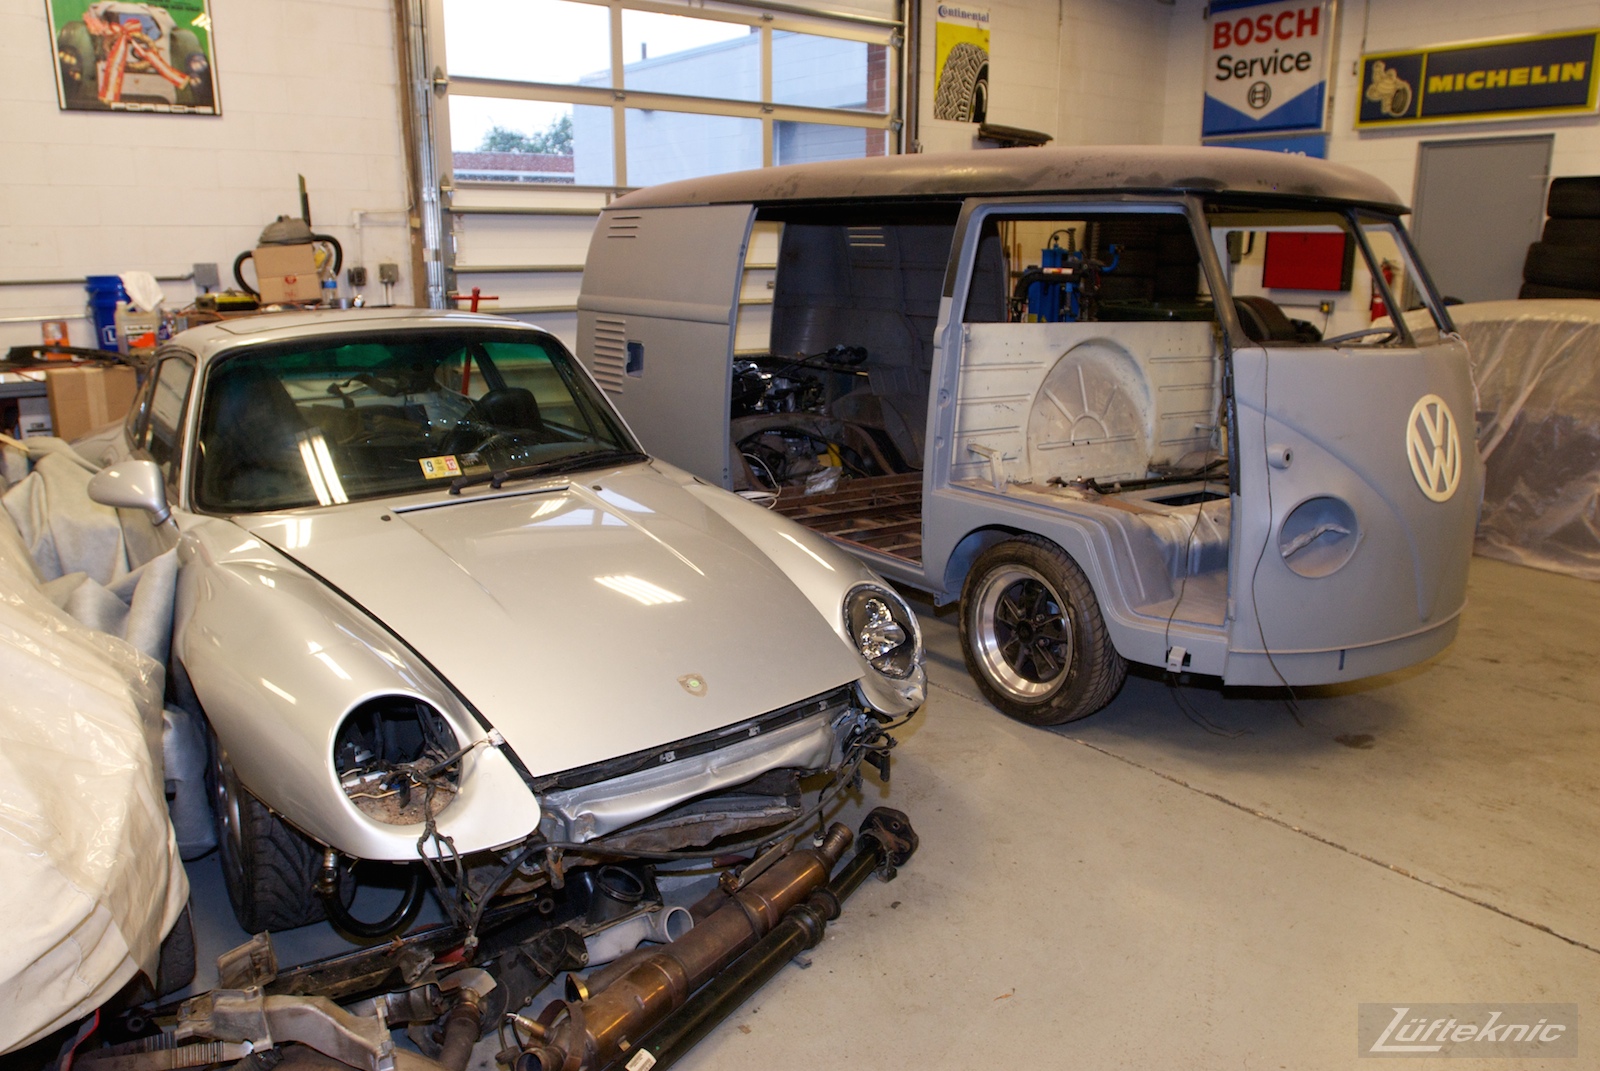 1956 Volkswagen double panel Transporter Porsche Bus with engine installed next to donor car.